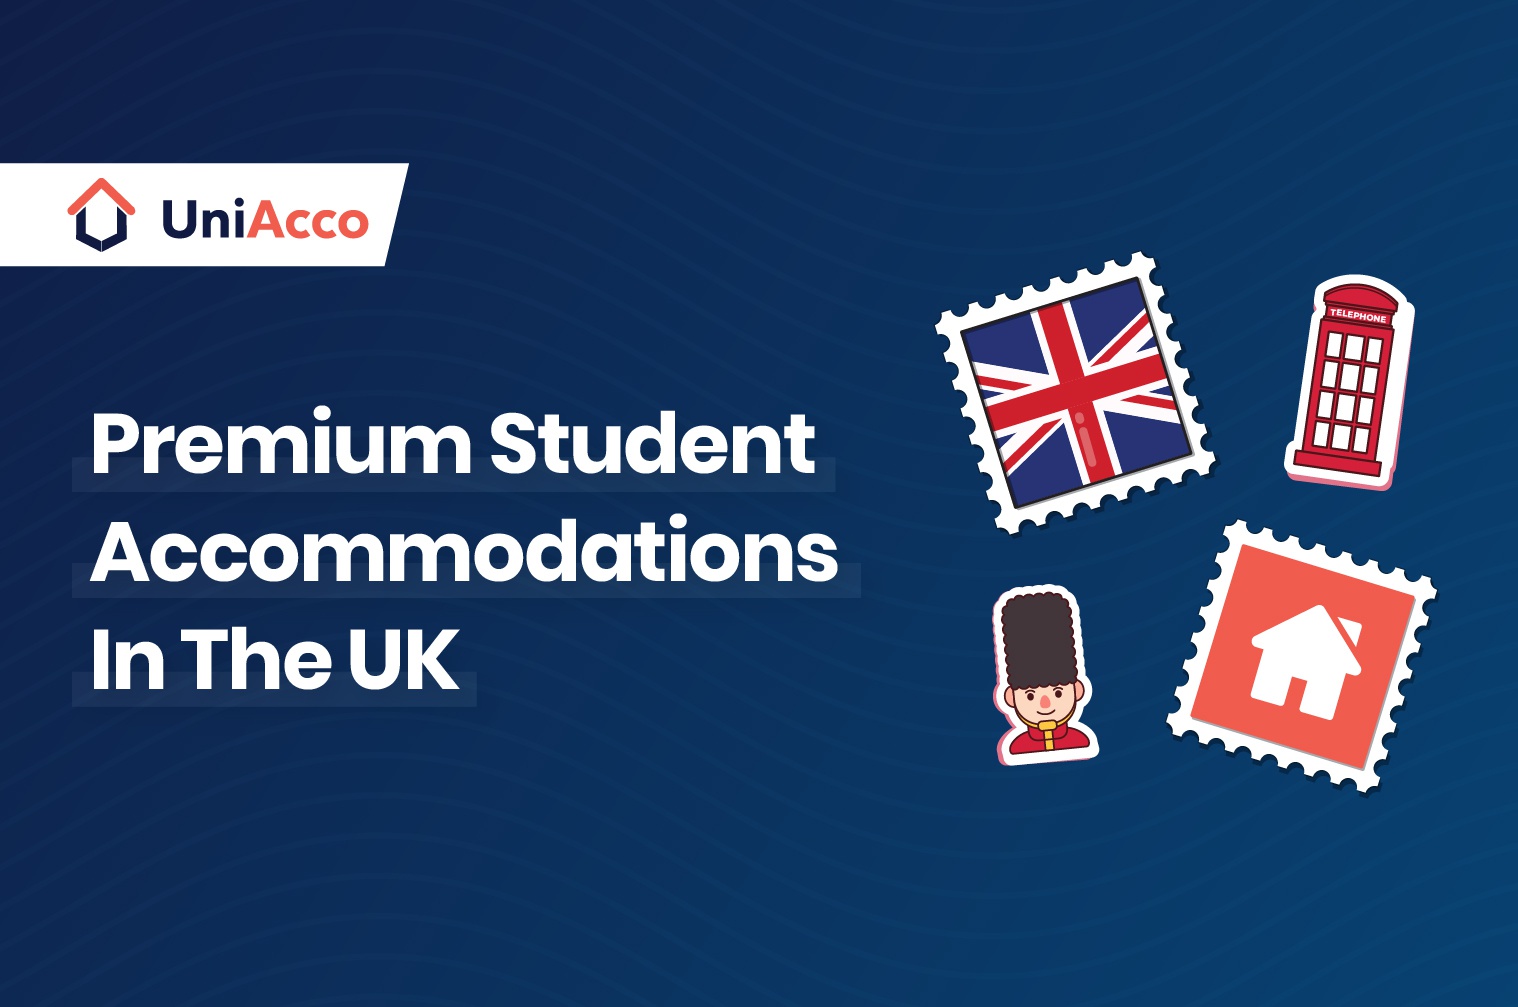 How To Snap The Most Premium Student Accommodations In The UK For Cheap With UniAcco